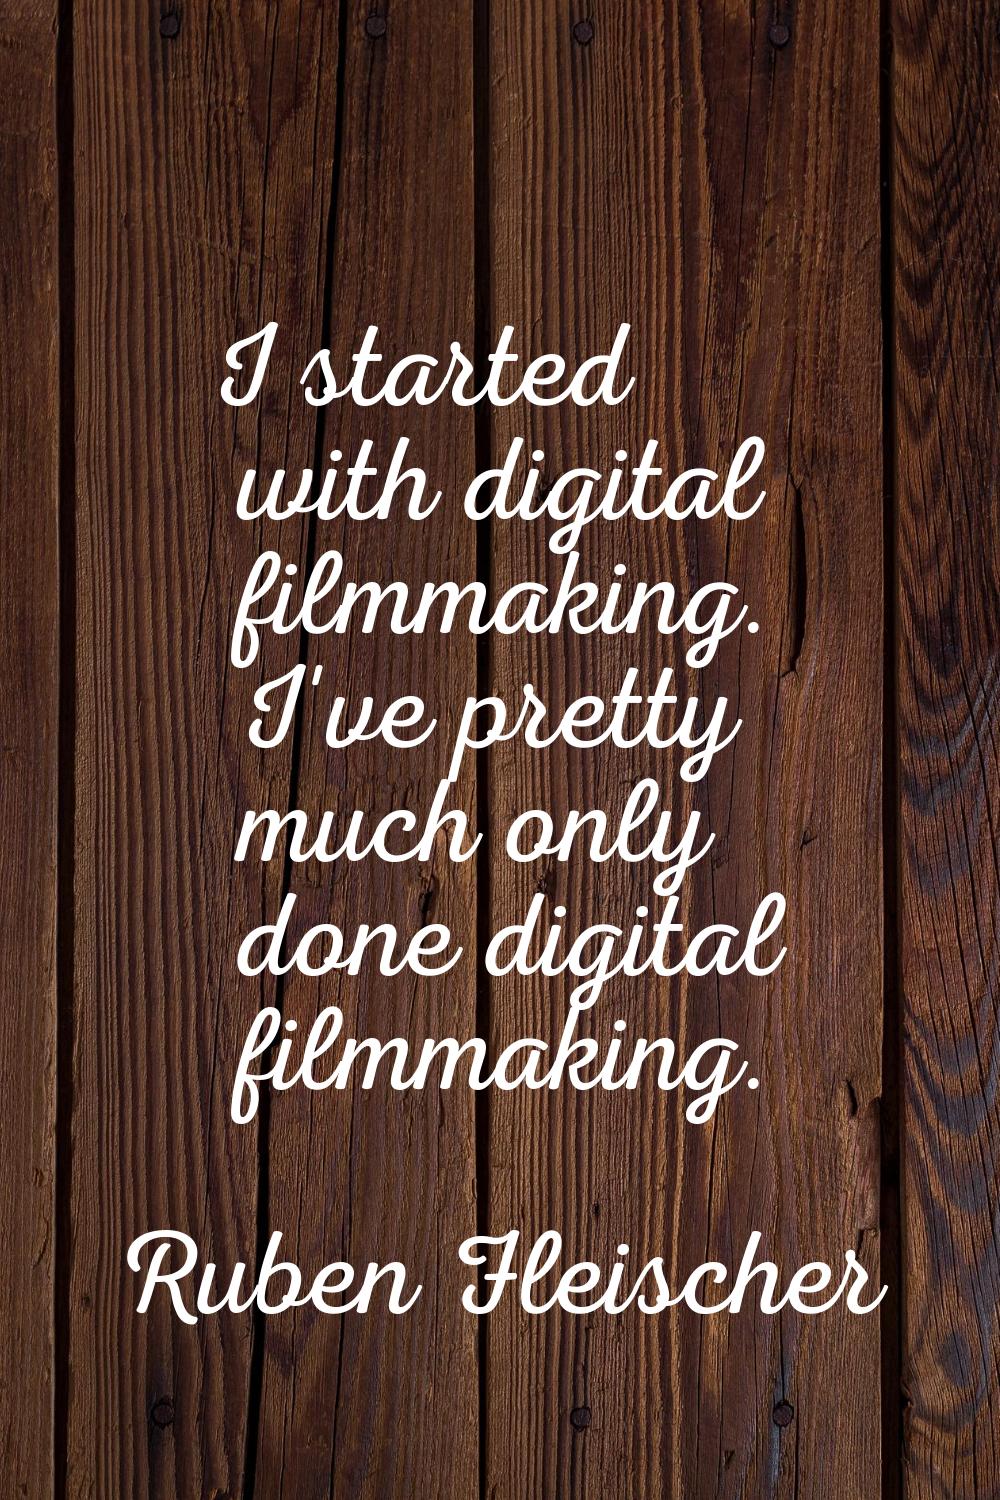 I started with digital filmmaking. I've pretty much only done digital filmmaking.